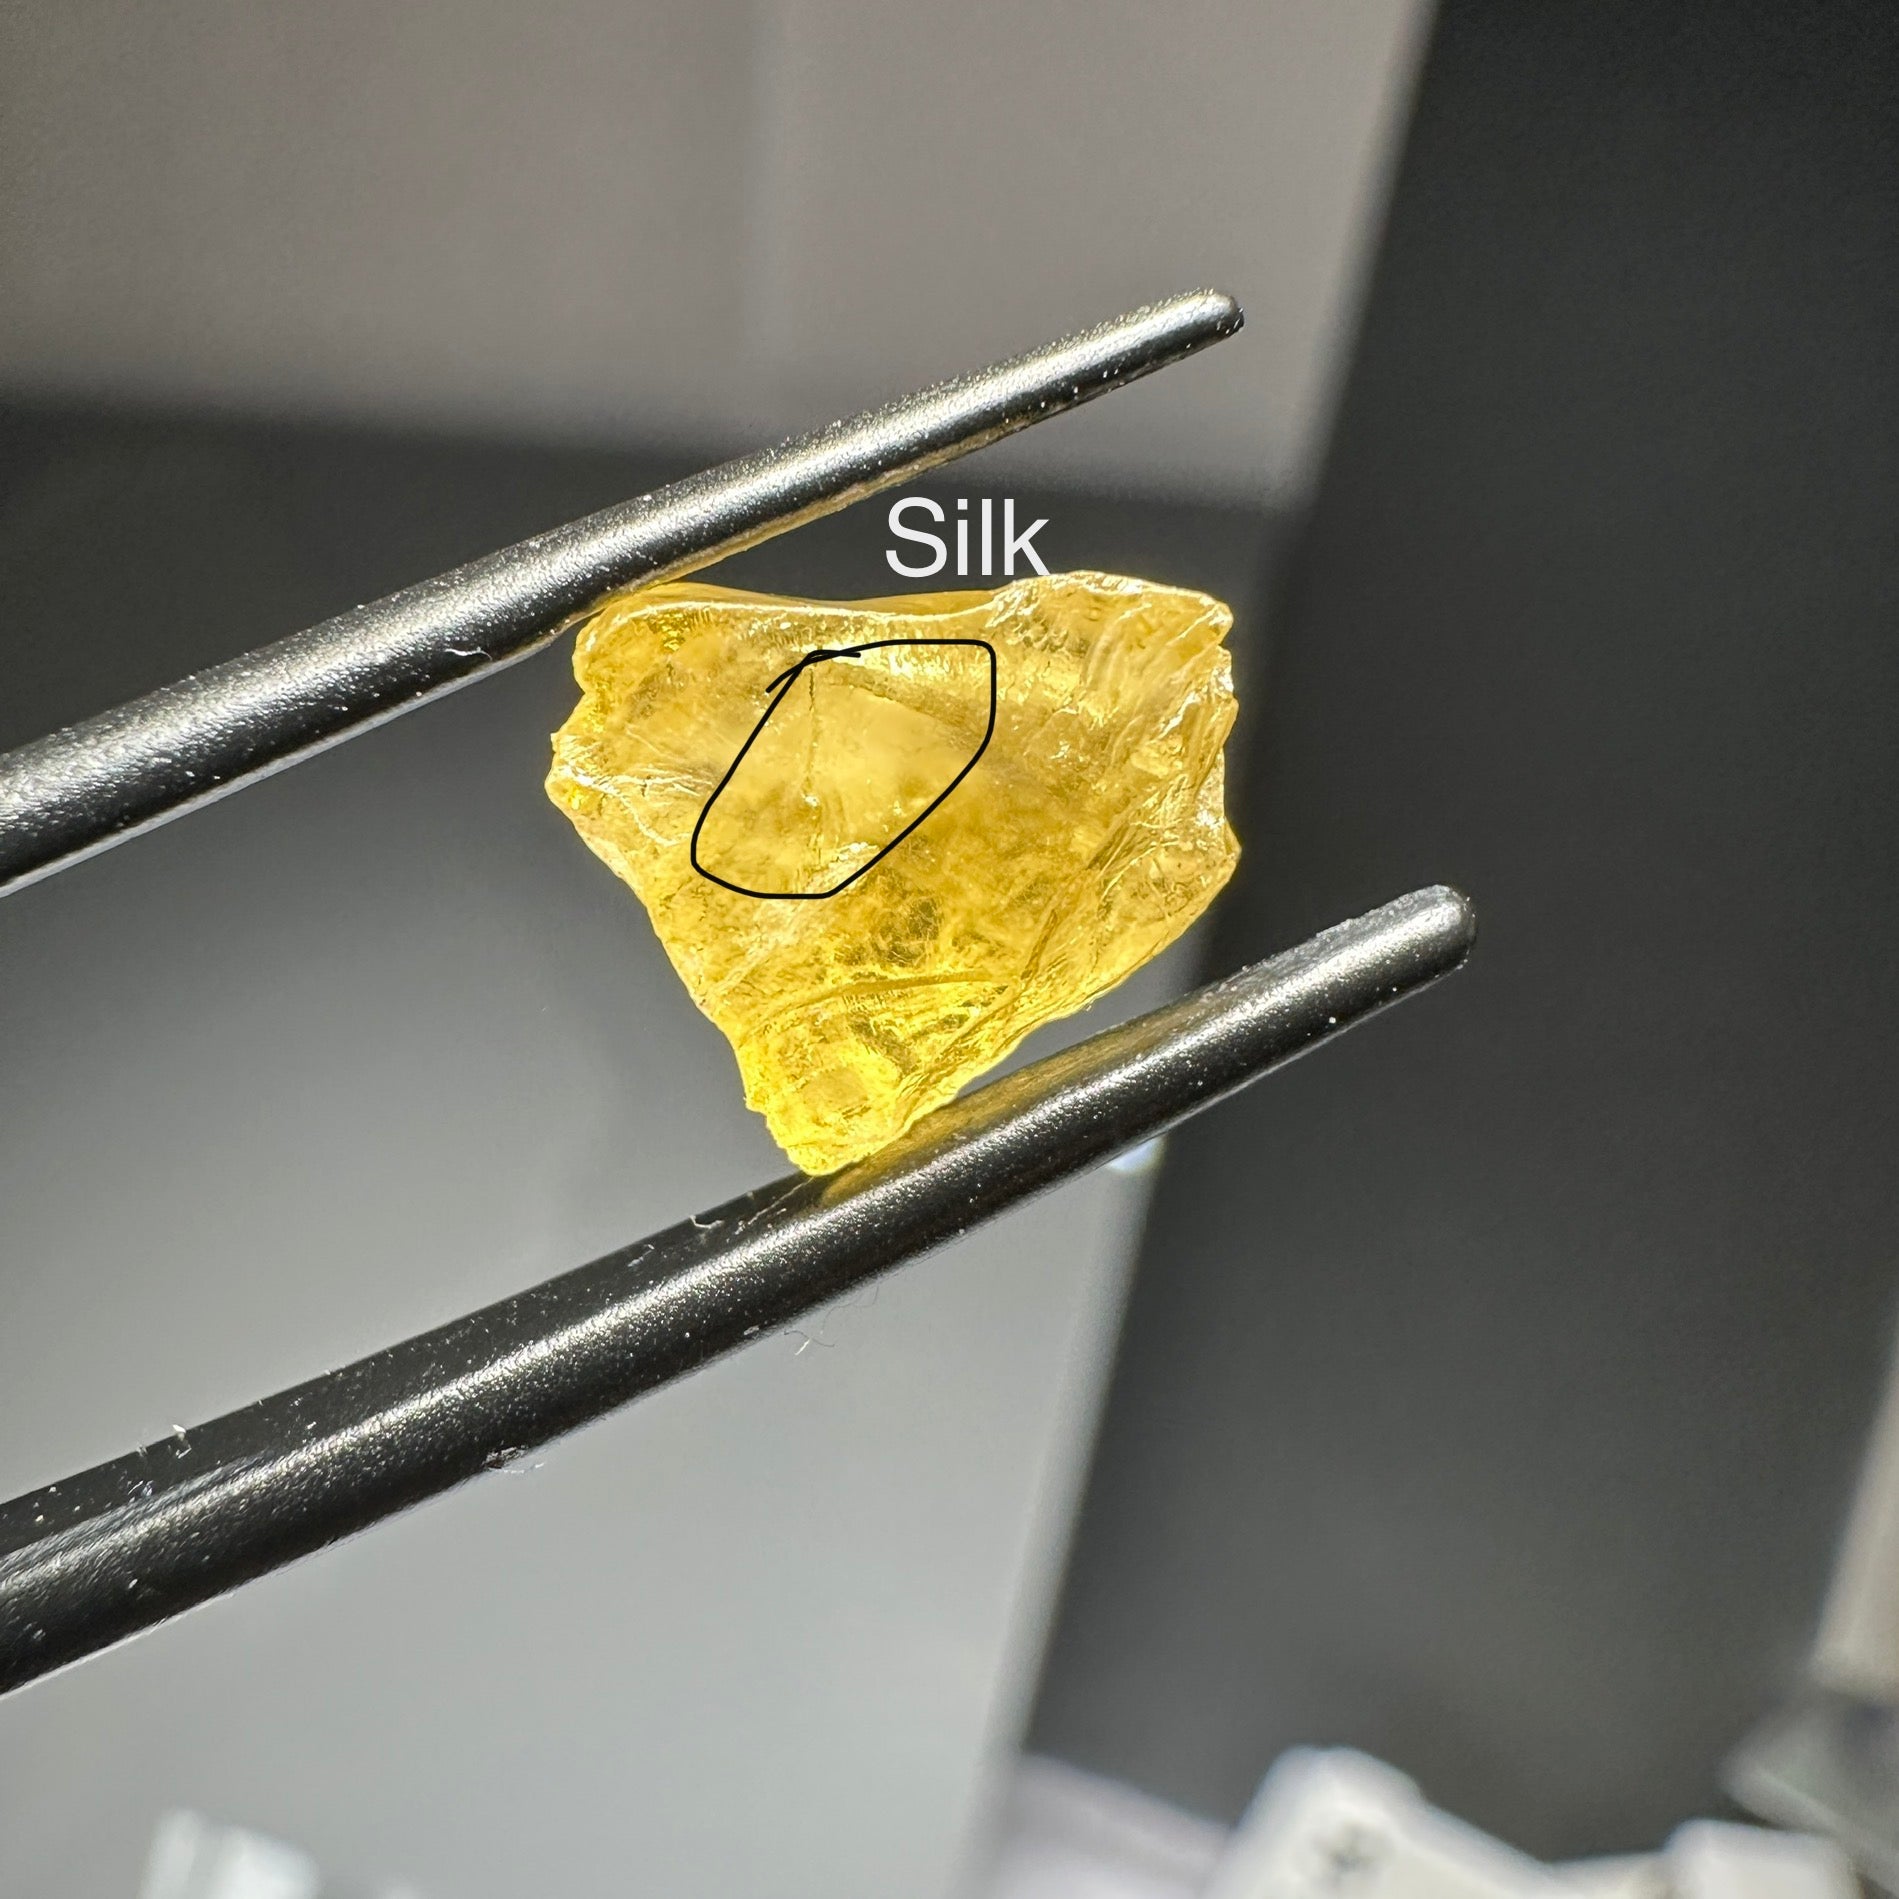 3.69ct Danburite, Silky inclusions, Tanzania. Untreated Unheated. I have circled the silk